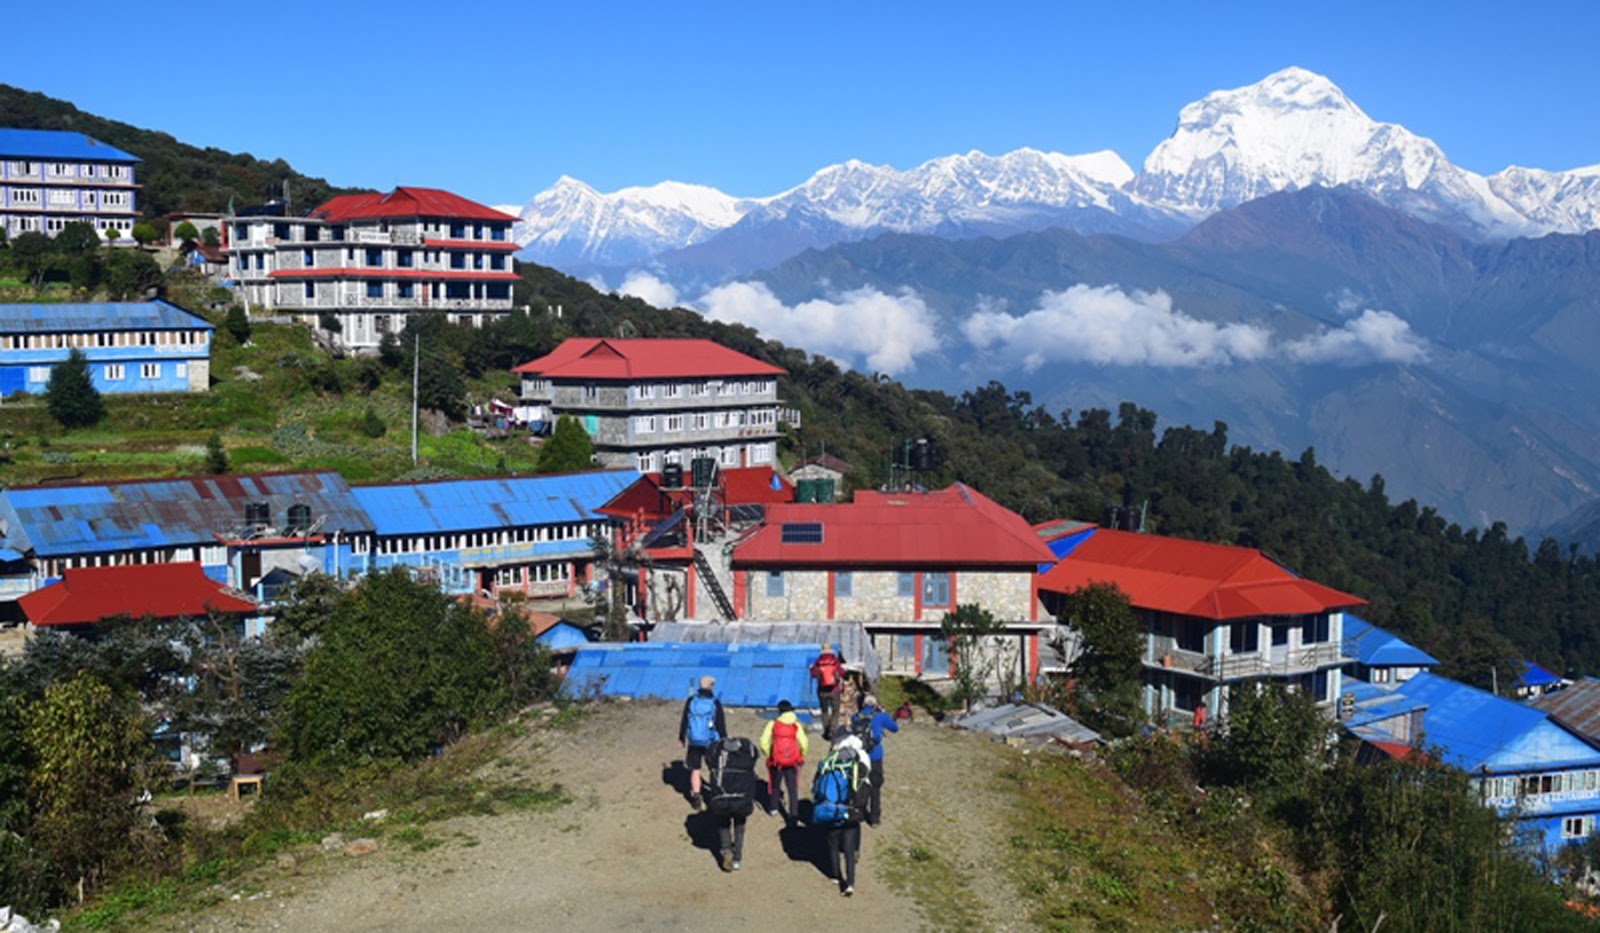 Hotels and lodges in Myagdi filled with domestic tourists